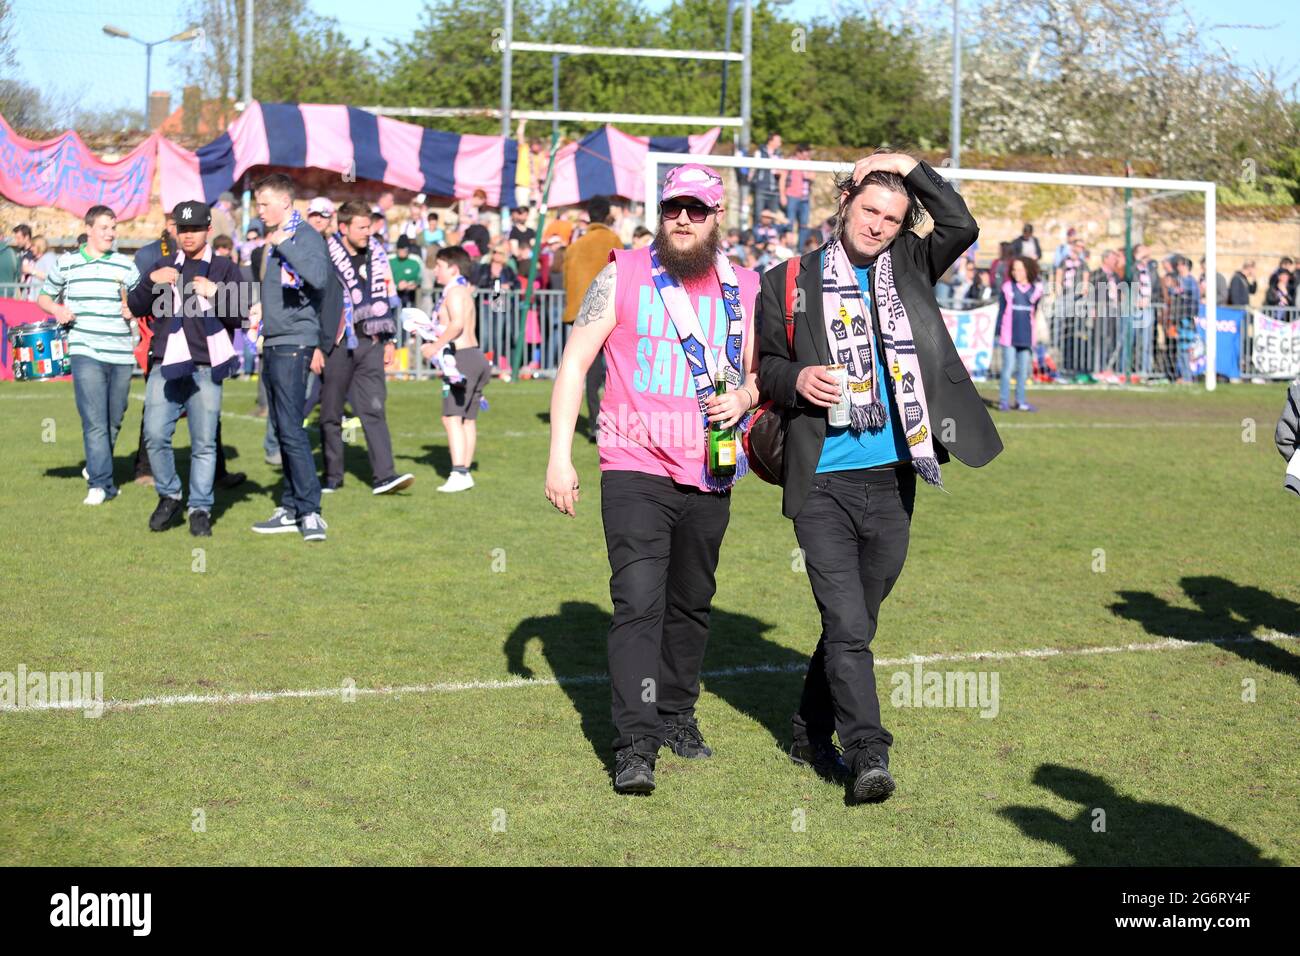 Dulwich Hamlet FC supporters on the pitch at their Champion Hill ground at East Dulwich in south east London, England, United Kingdom, Stock Photo